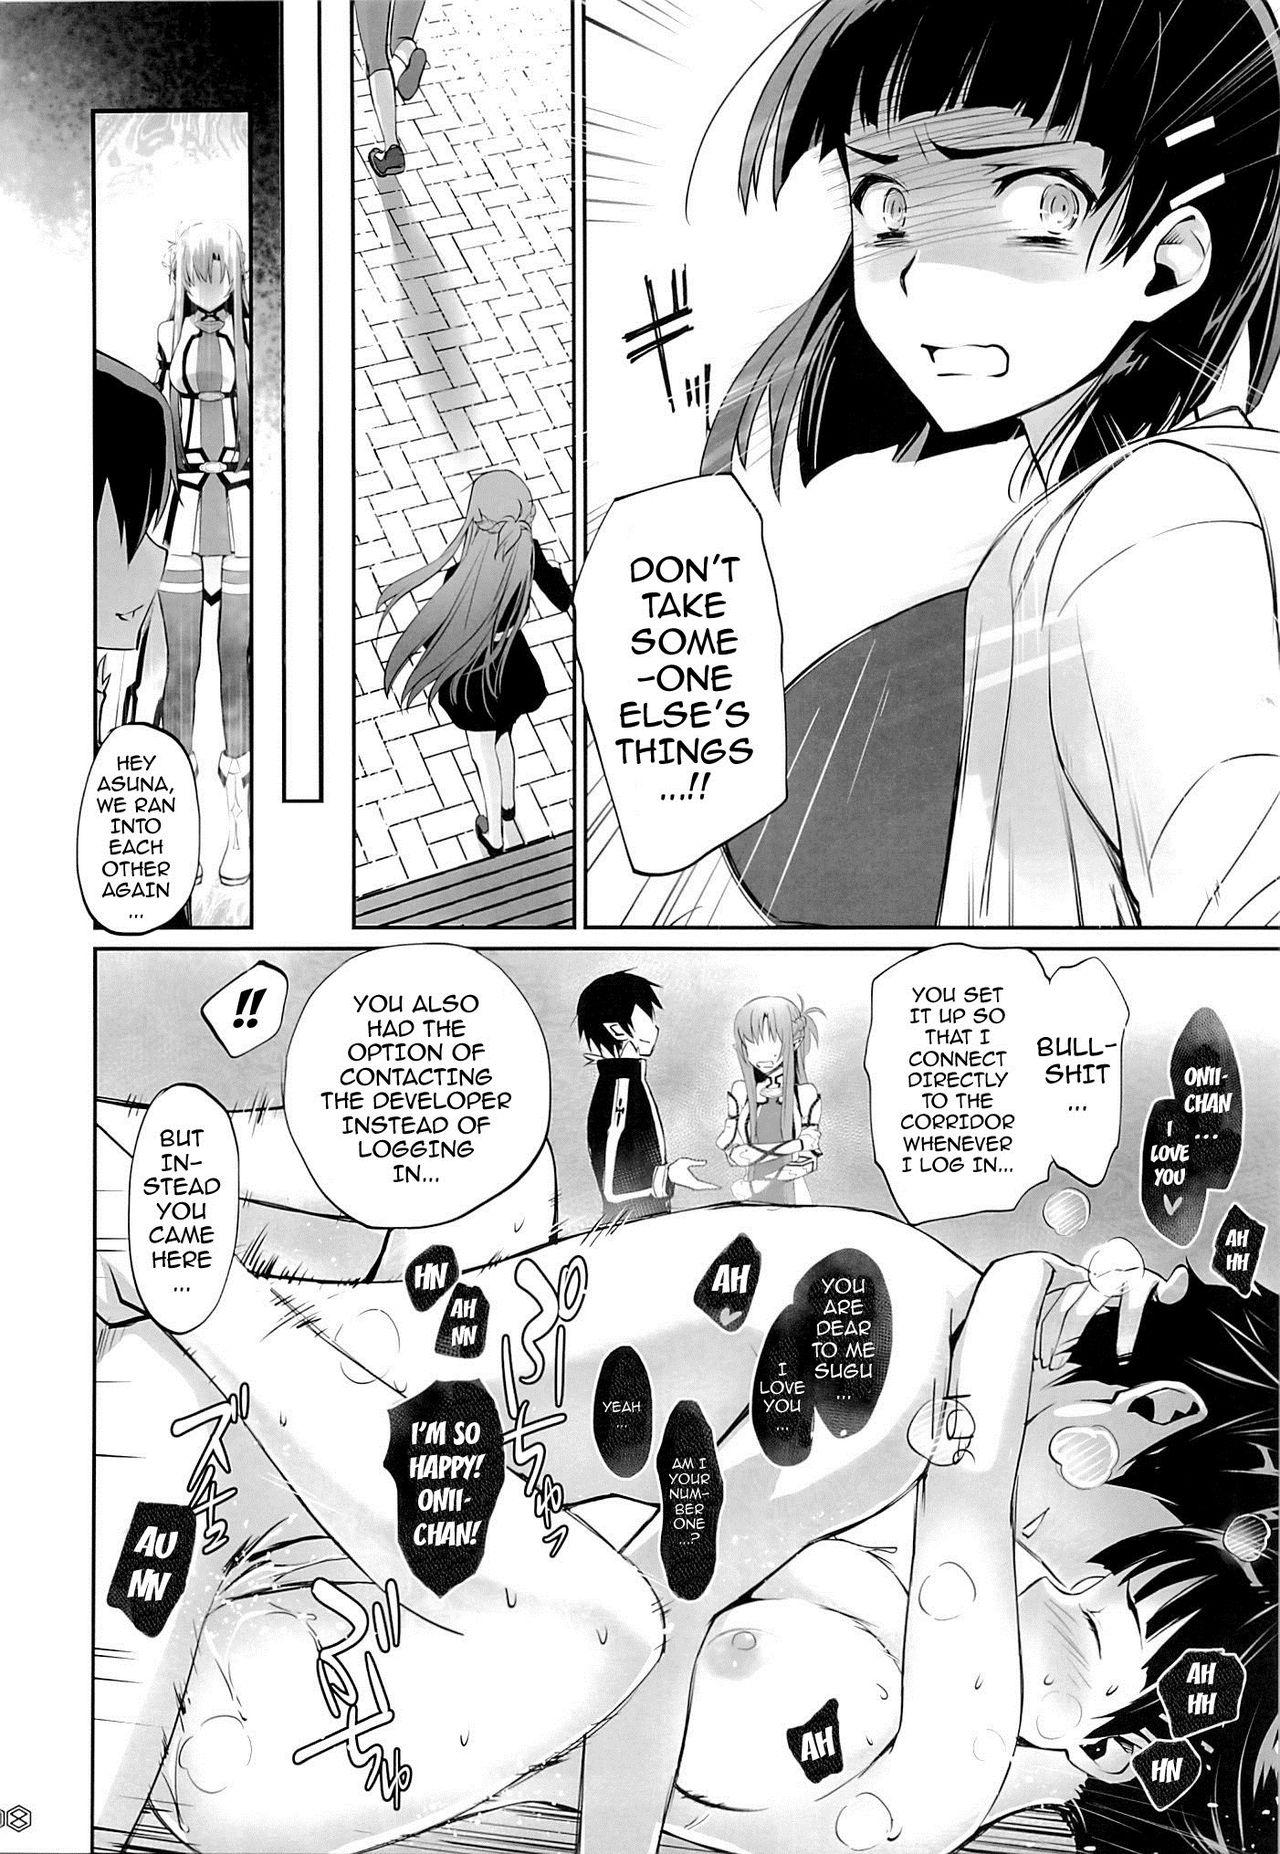 Rico turnover - Sword art online Creampies - Page 7